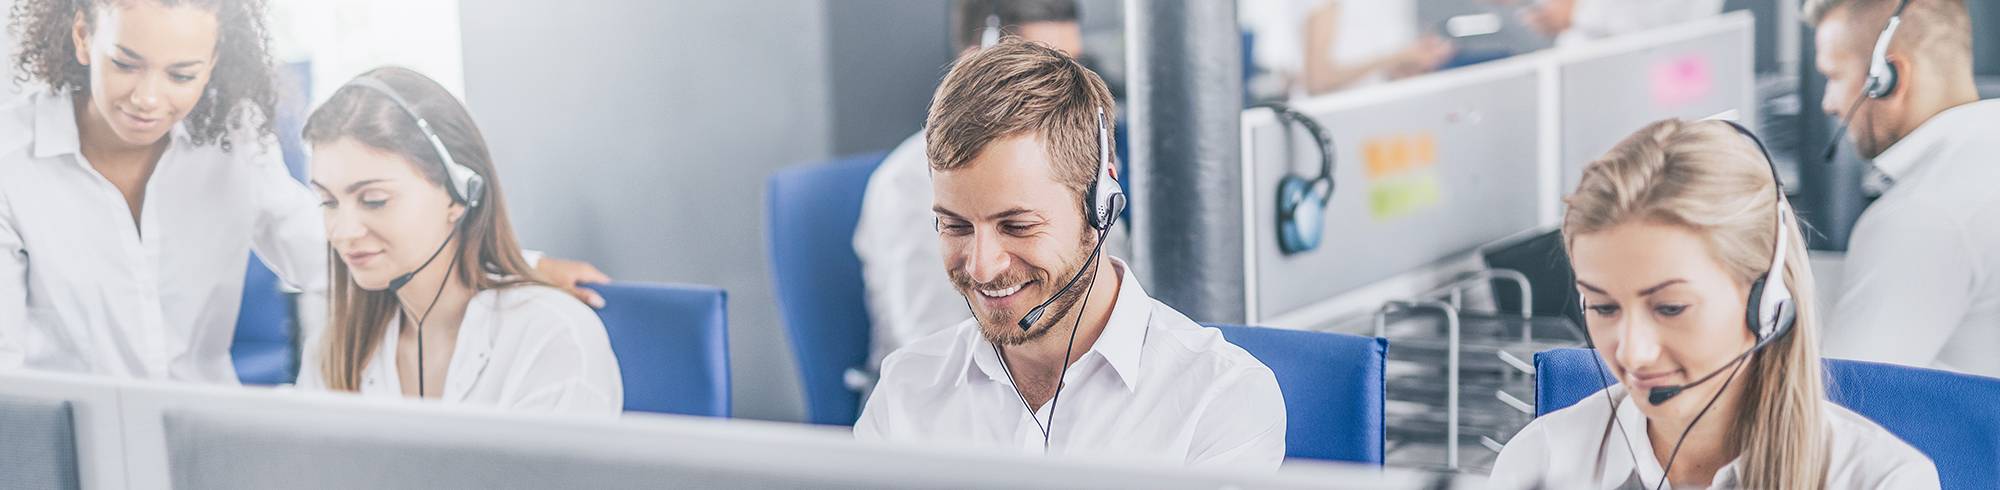 Dymax customer support team is available to help